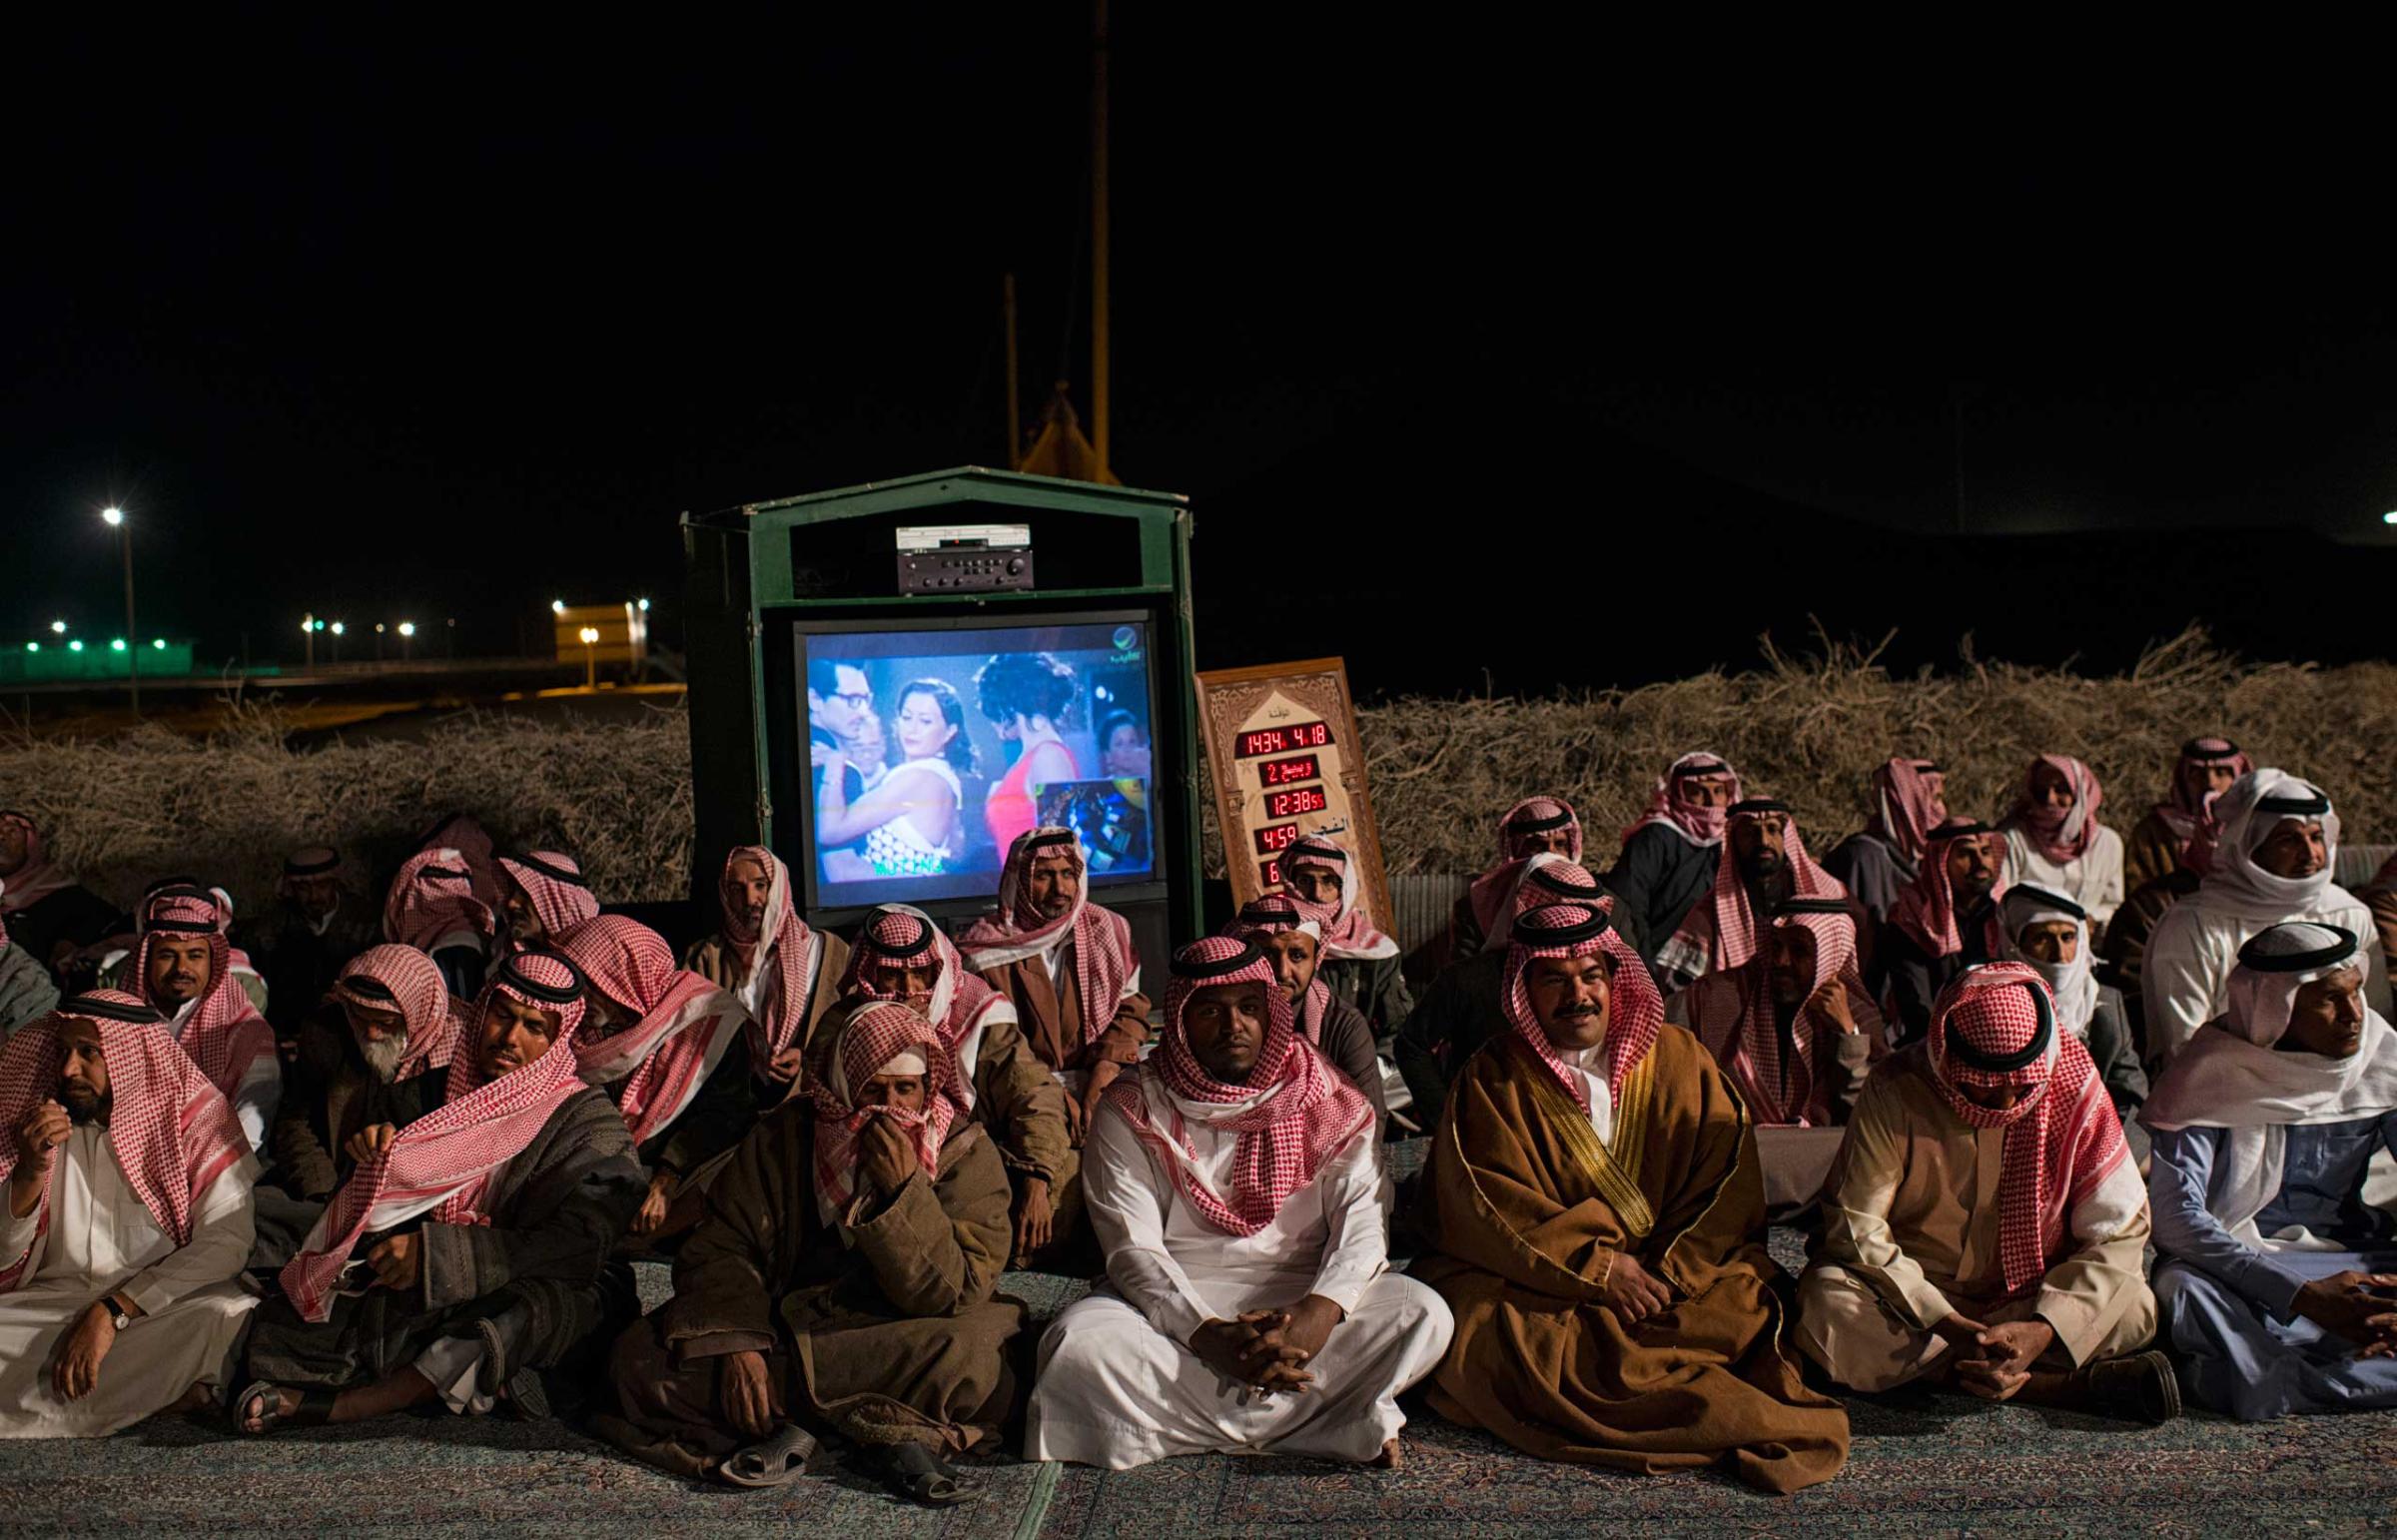 Saudi citizens rest after presenting Saudi Billionaire HRH Prince al Waleed bin Talal with petitions for his help at a desert camp outside of Riyadh, in Saudi Arabia, February 27, 2013.   Like many families across Saudi Arabia who are barely scraping above the poverty line each month, many poor Saudis rely on the hope of the charity of others to survive. (Credit: Lynsey Addario/ VII)